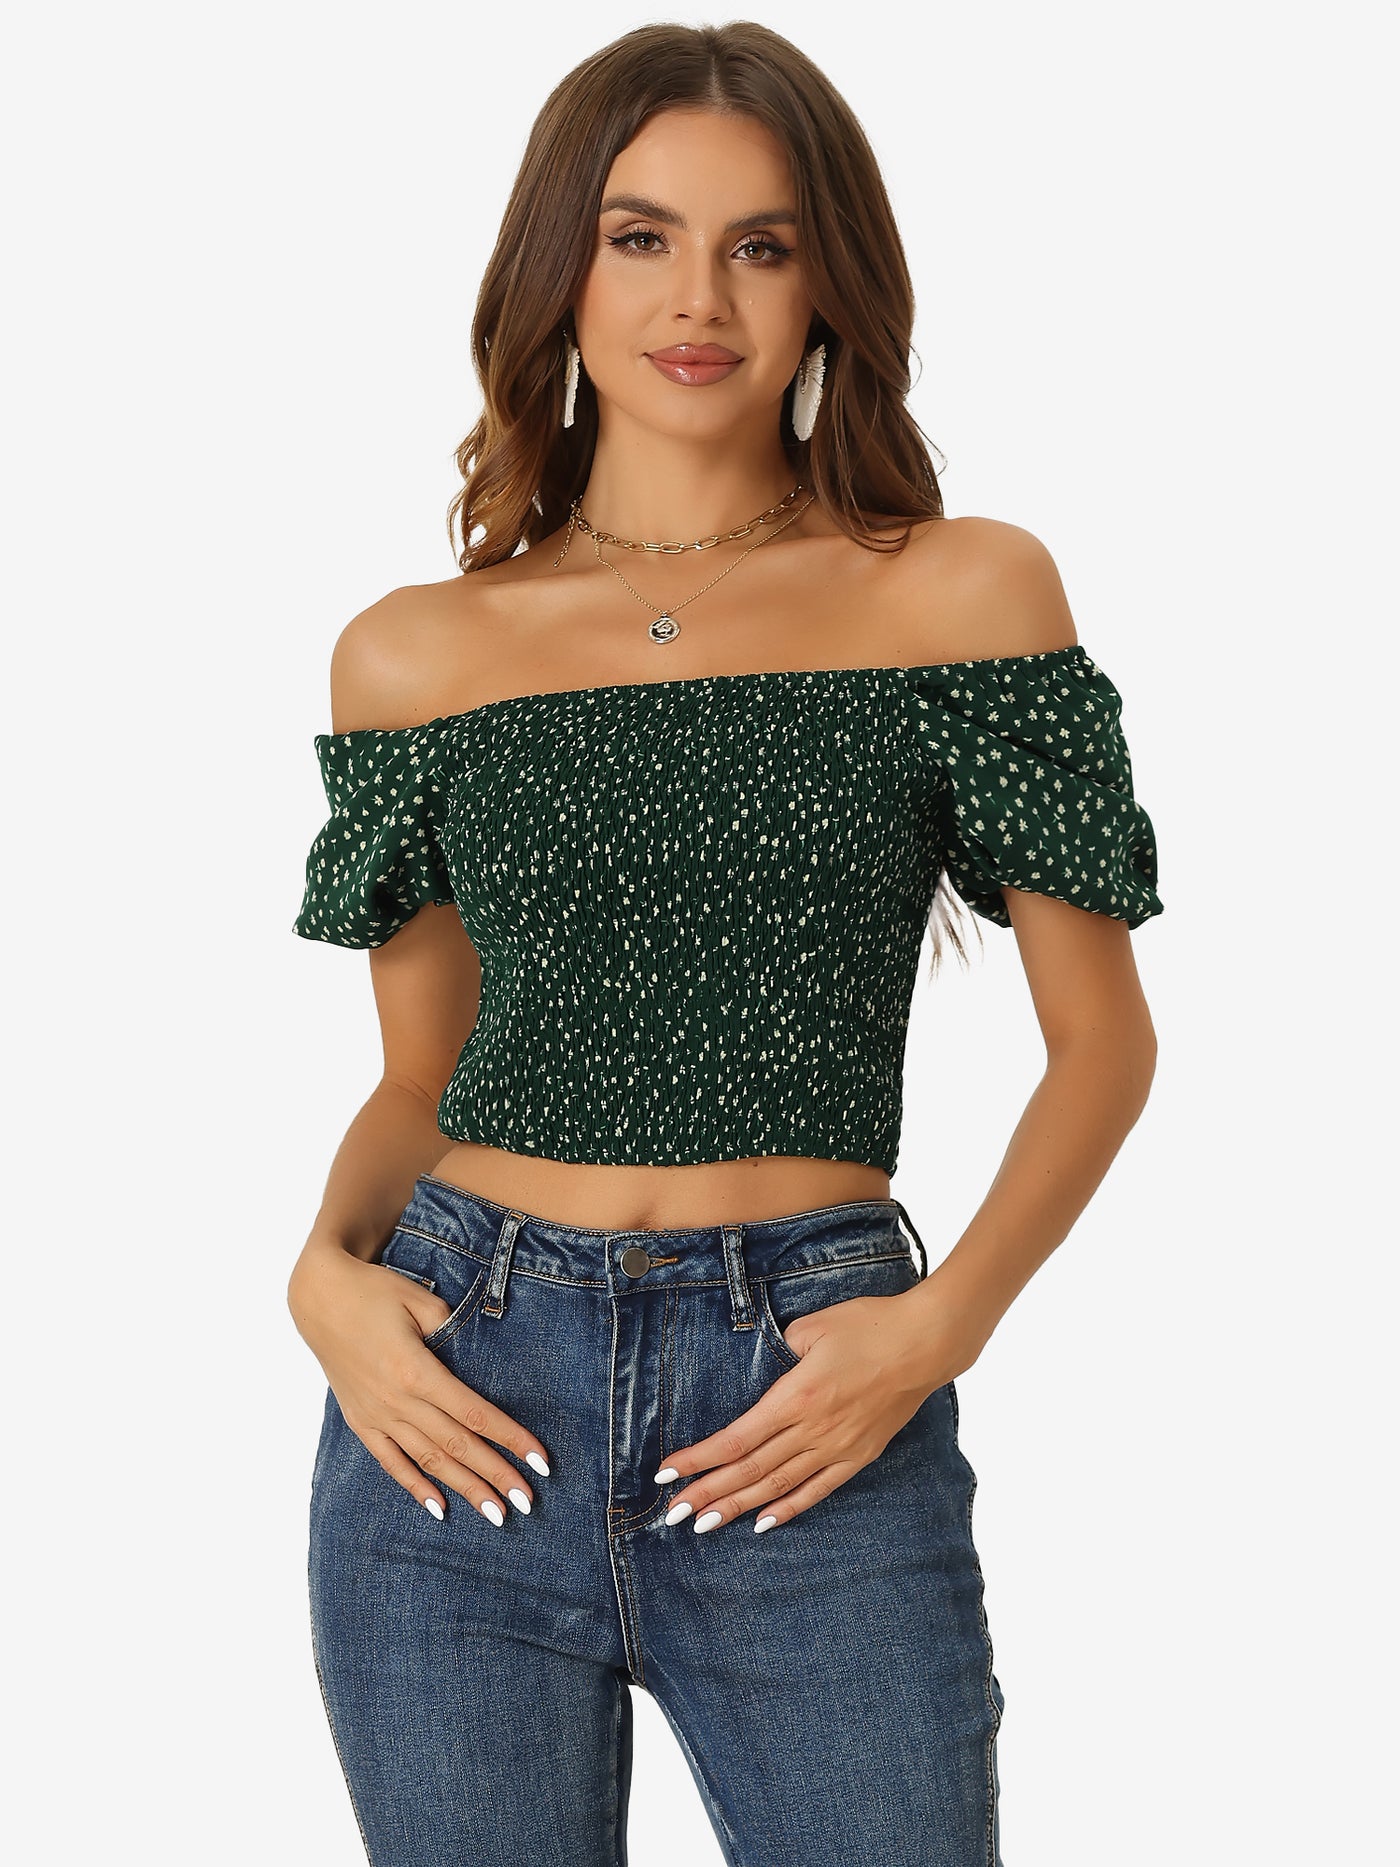 Allegra K Floral Smocked Tops Puff Sleeve Crop Top Summer Casual Blouse